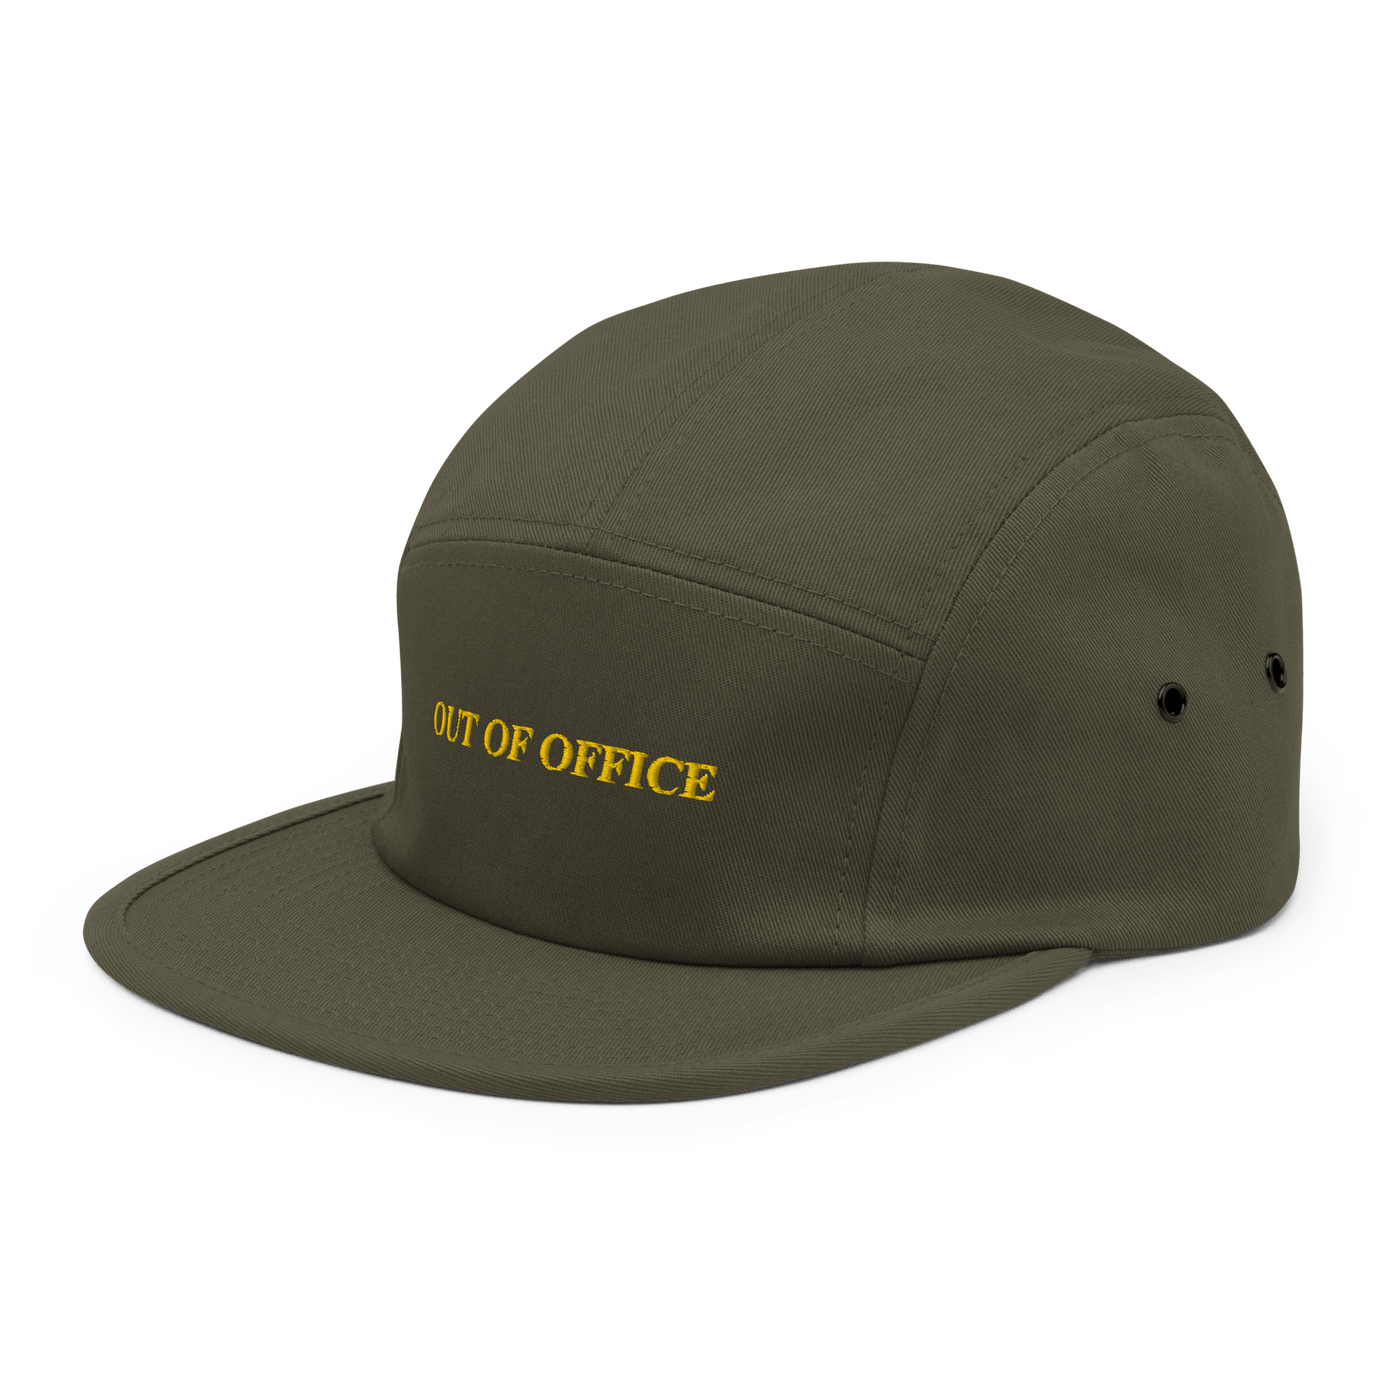 OUT OF OFFICE Five Panel Hat - Olive - - Just Another Cap Store